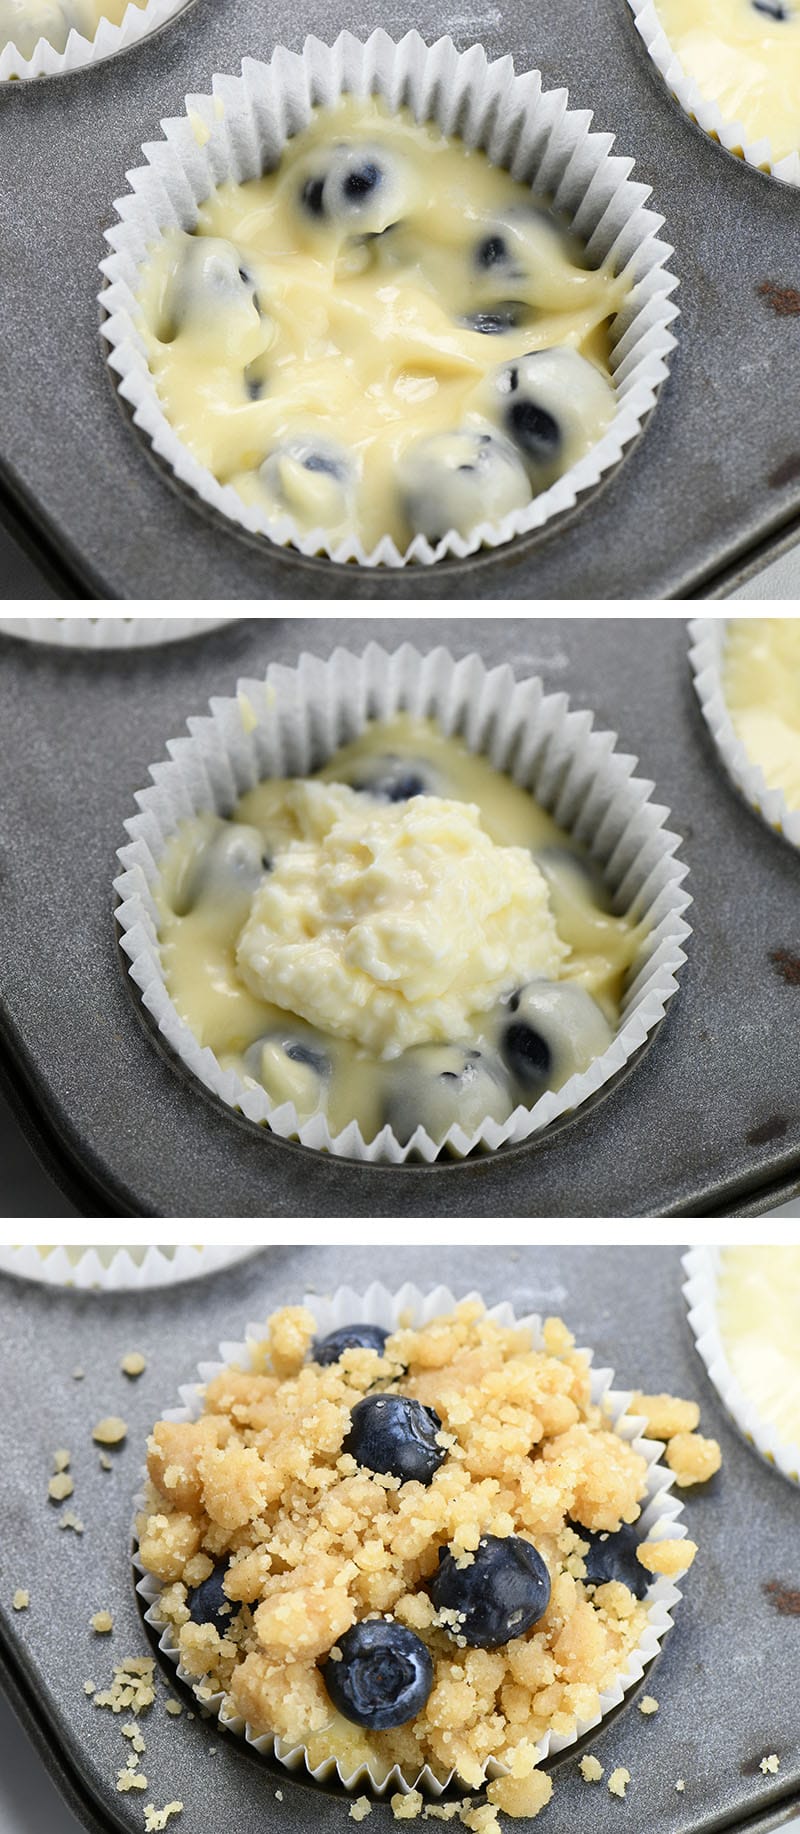 Blueberry Cream Cheese Muffins step-by-step instructions.